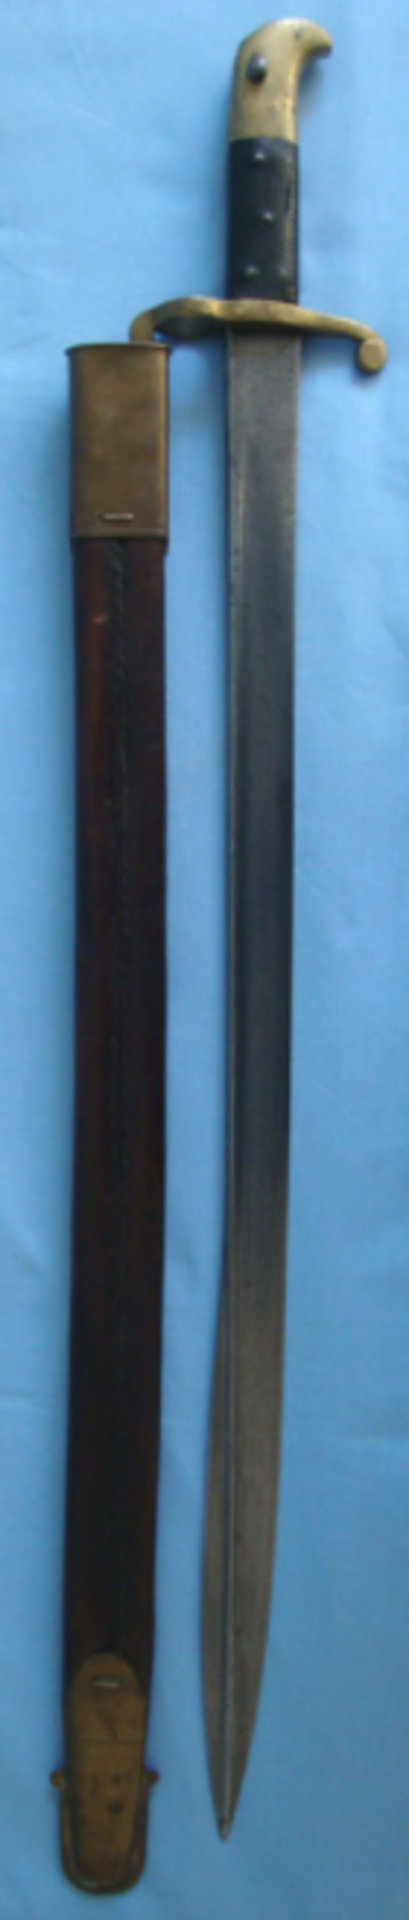 British Lancaster Sword Bayonet For The Royal Sappers and Miners Carbine of 1855